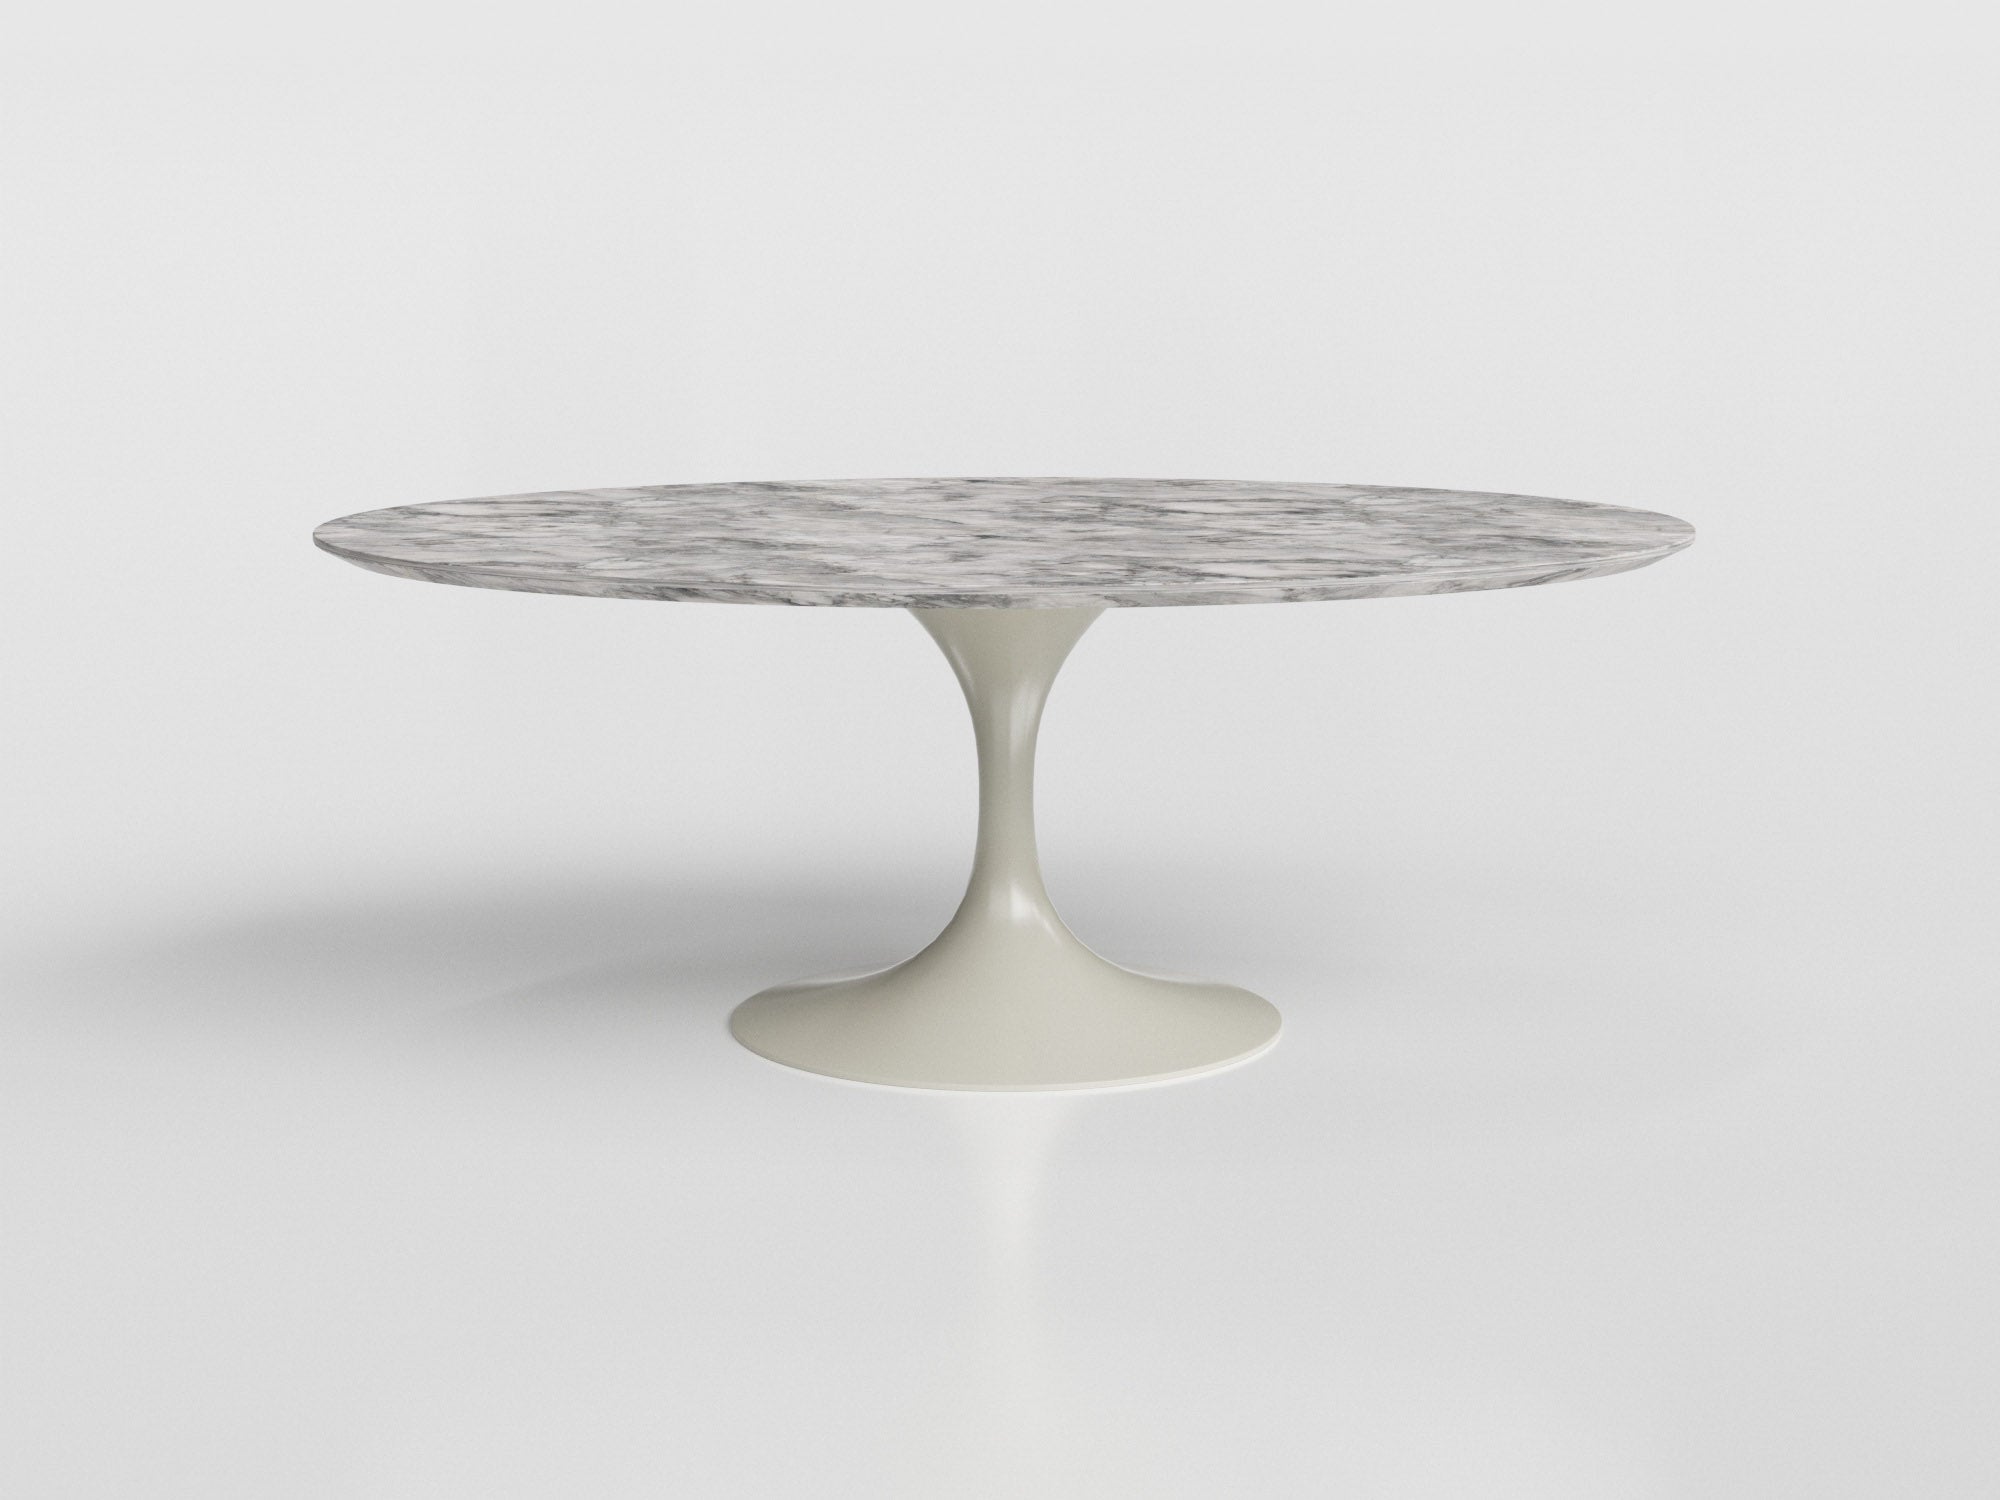 Bora Bora coffee table with oval marble top and gray aluminum base, designed by Luciano Mandelli